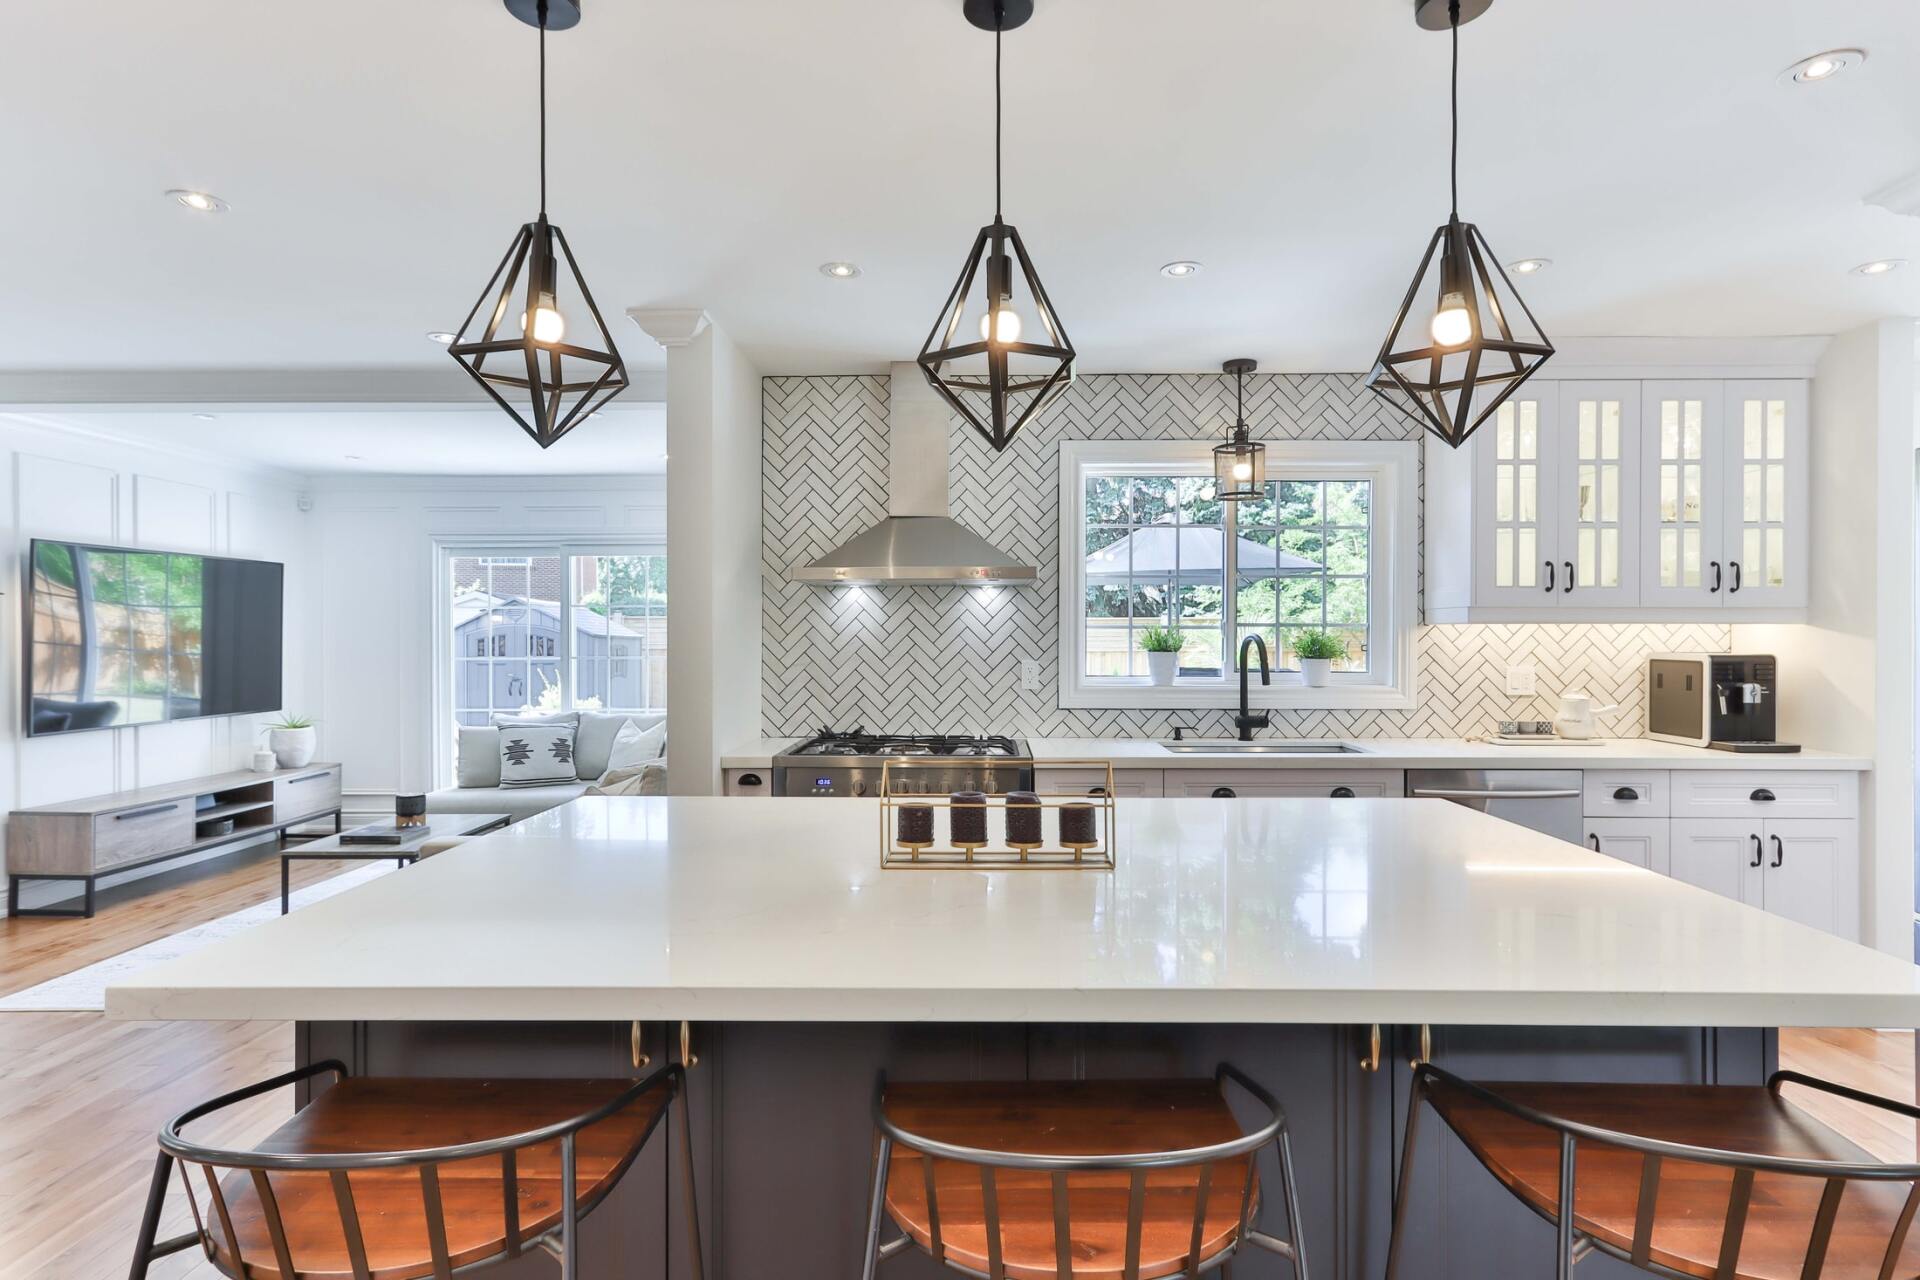 Upgrade your kitchen light fixtures for a brighter, airy feeling,